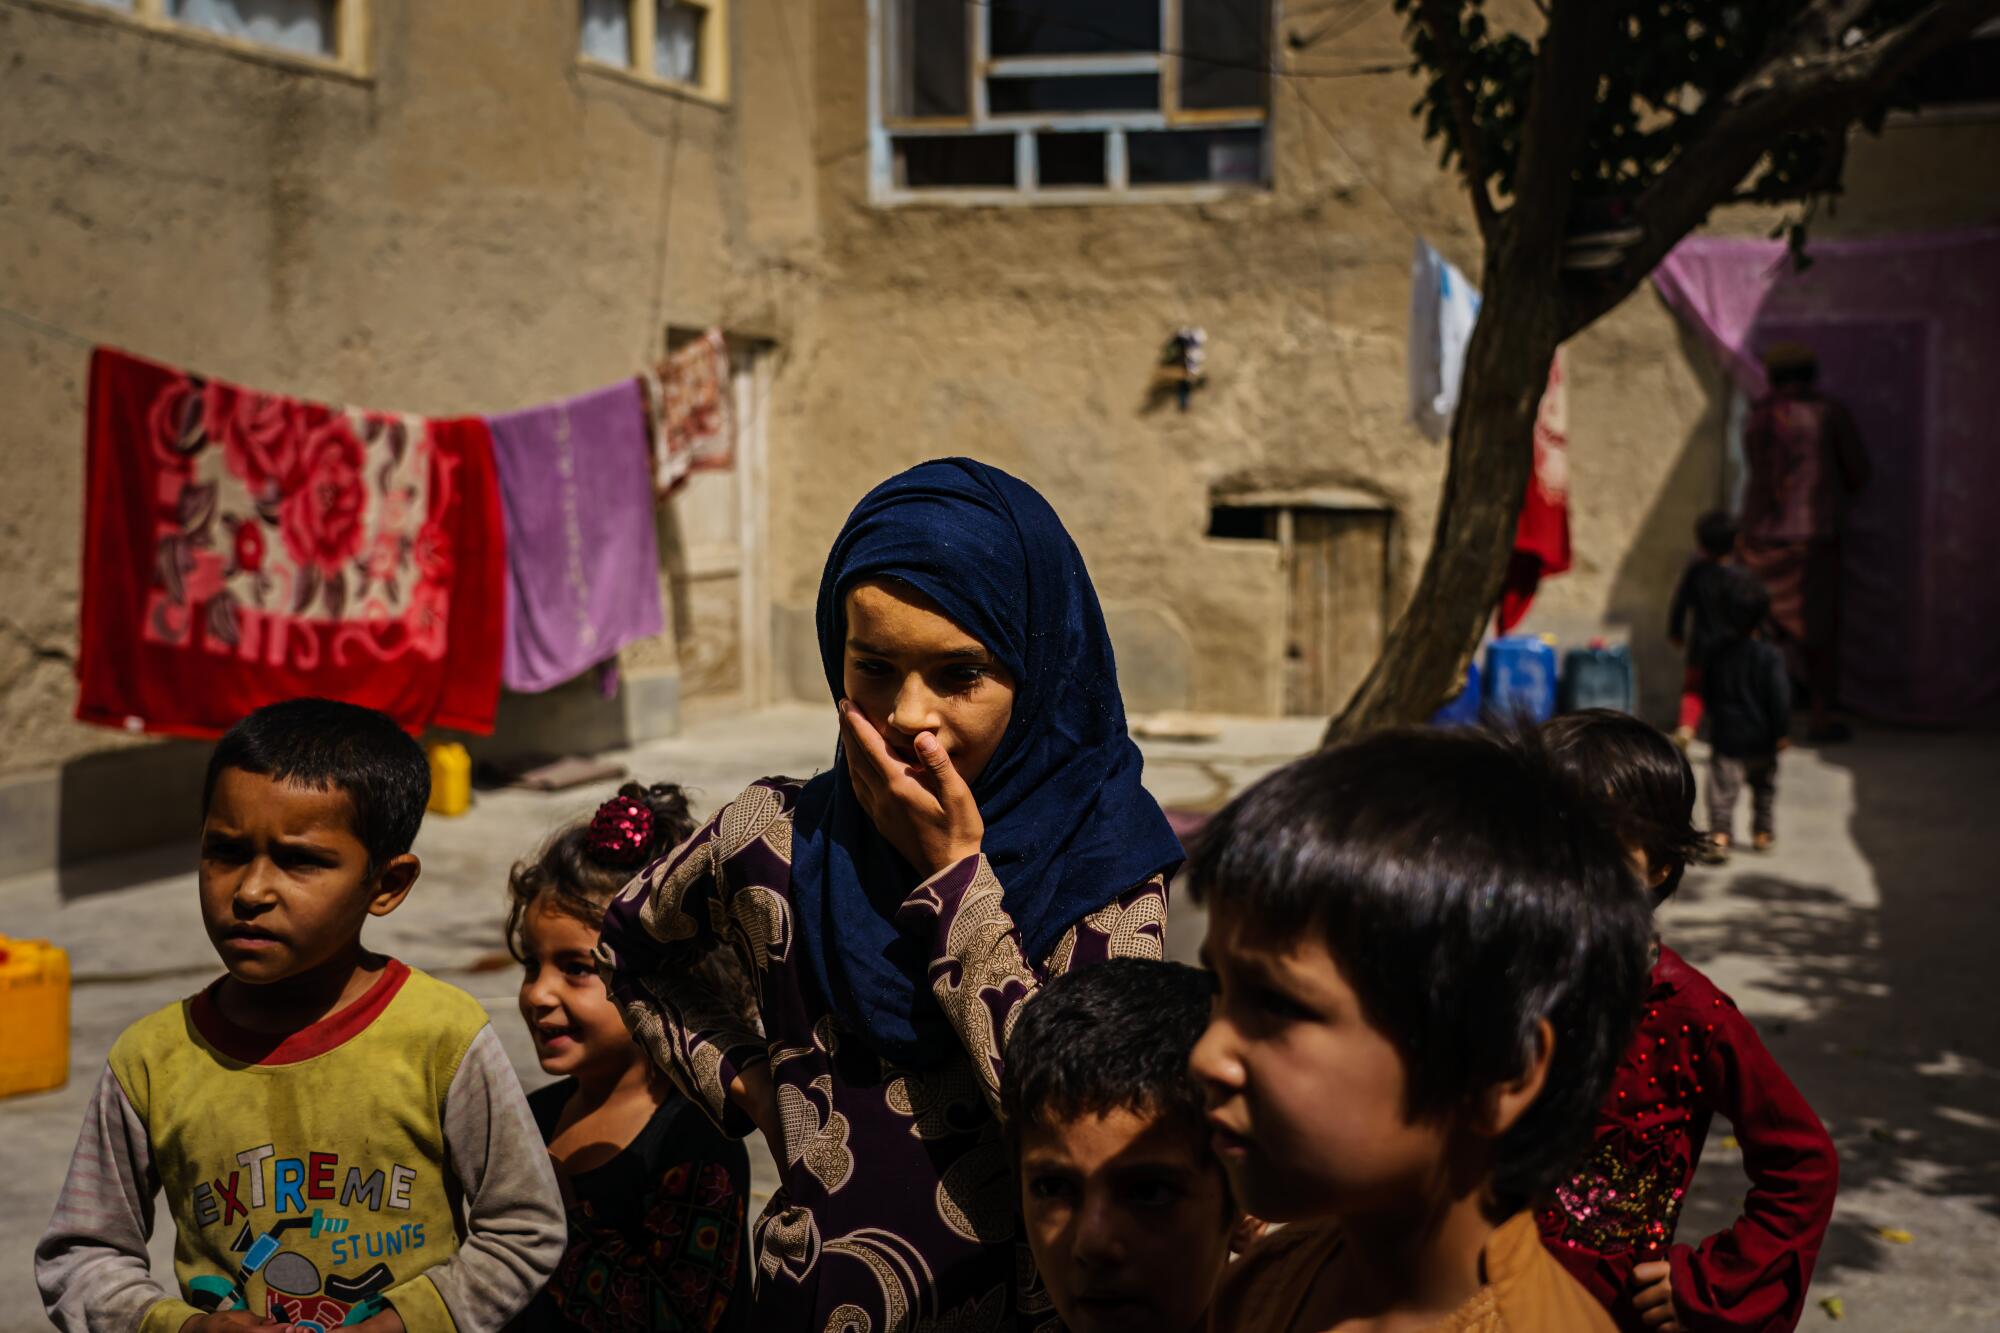 An Afghan girl is flanked by other children in a courtyard.